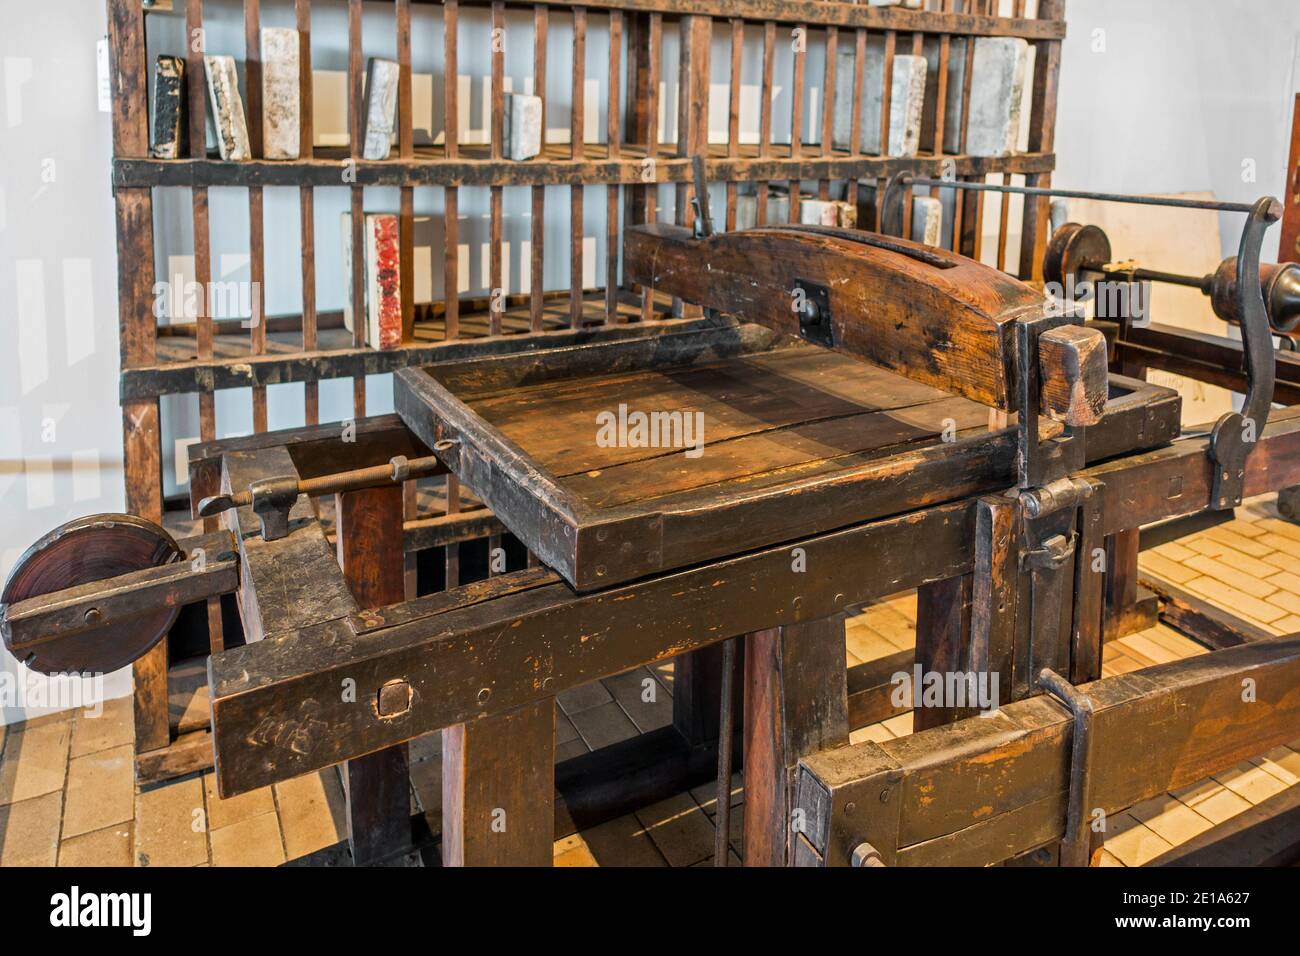 Wooden early 19th century lithographic press, manually operated using a star wheel Stock Photo